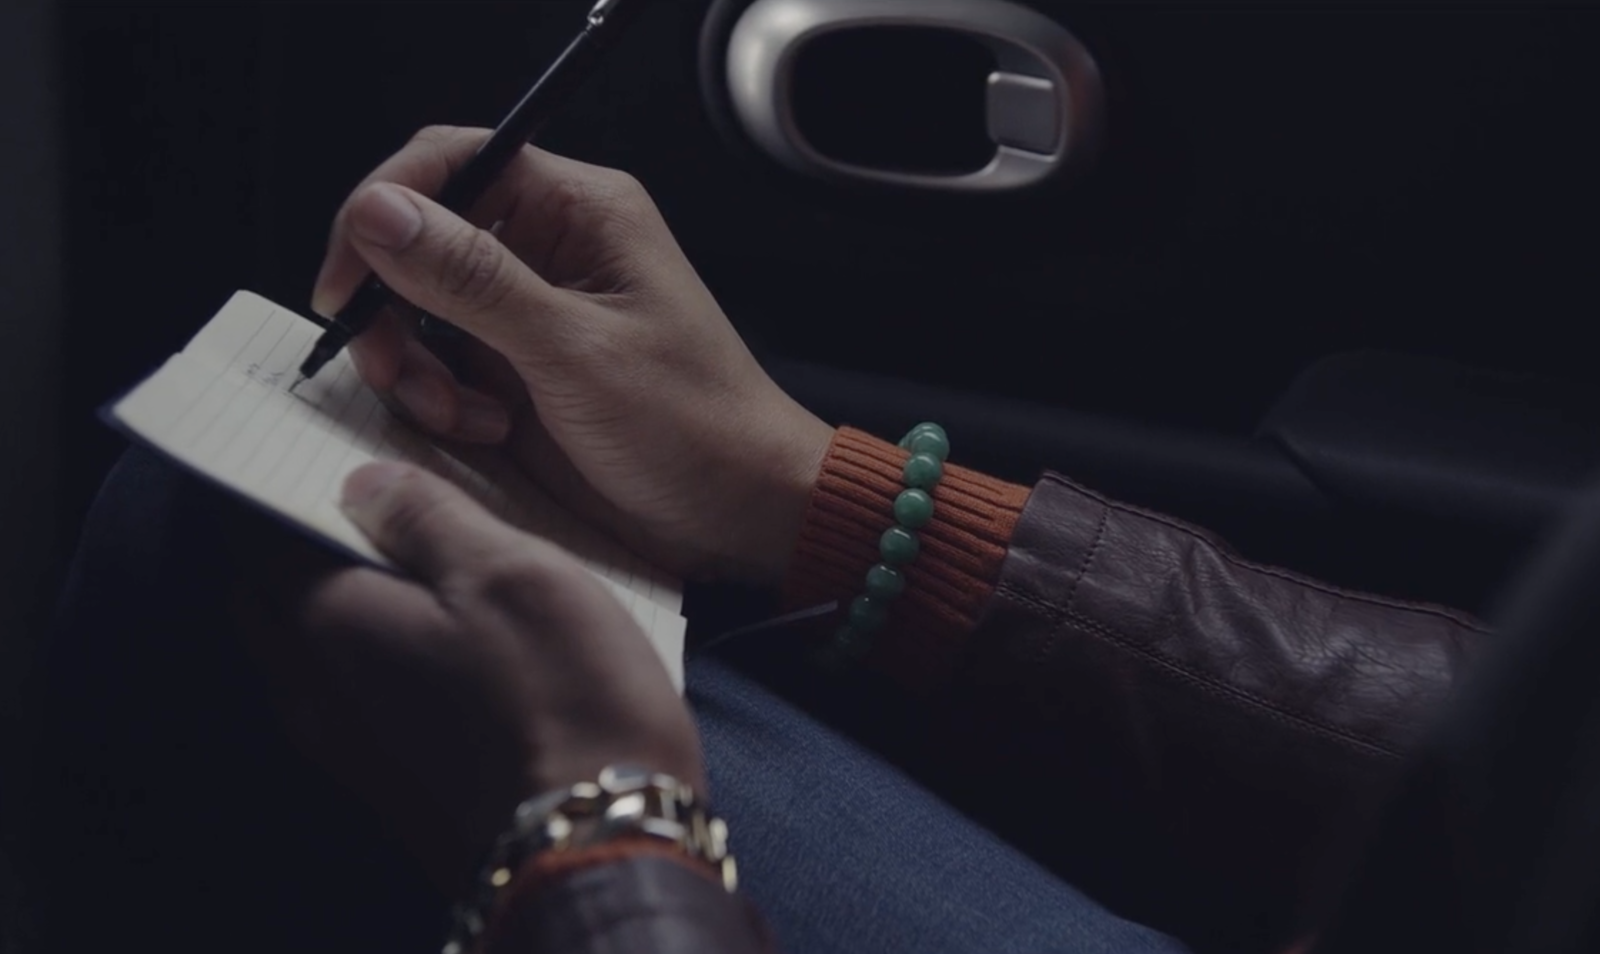 Hands writing in a notebook in a car